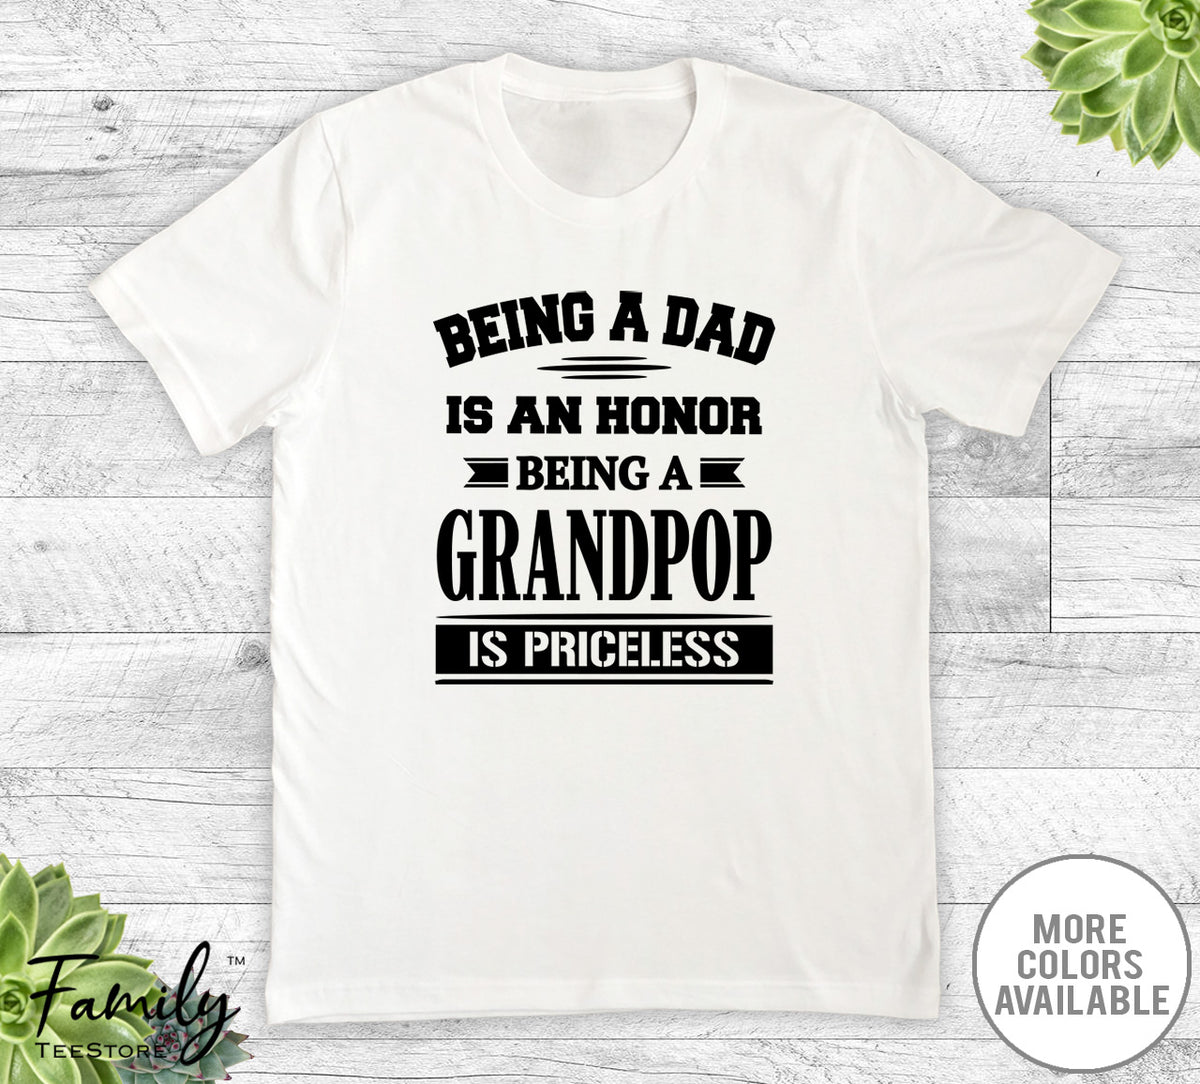 Being A Dad Is An Honor Being A Grandpop Is Priceless - Unisex T-shirt - Grandpop Shirt - Grandpop Gift